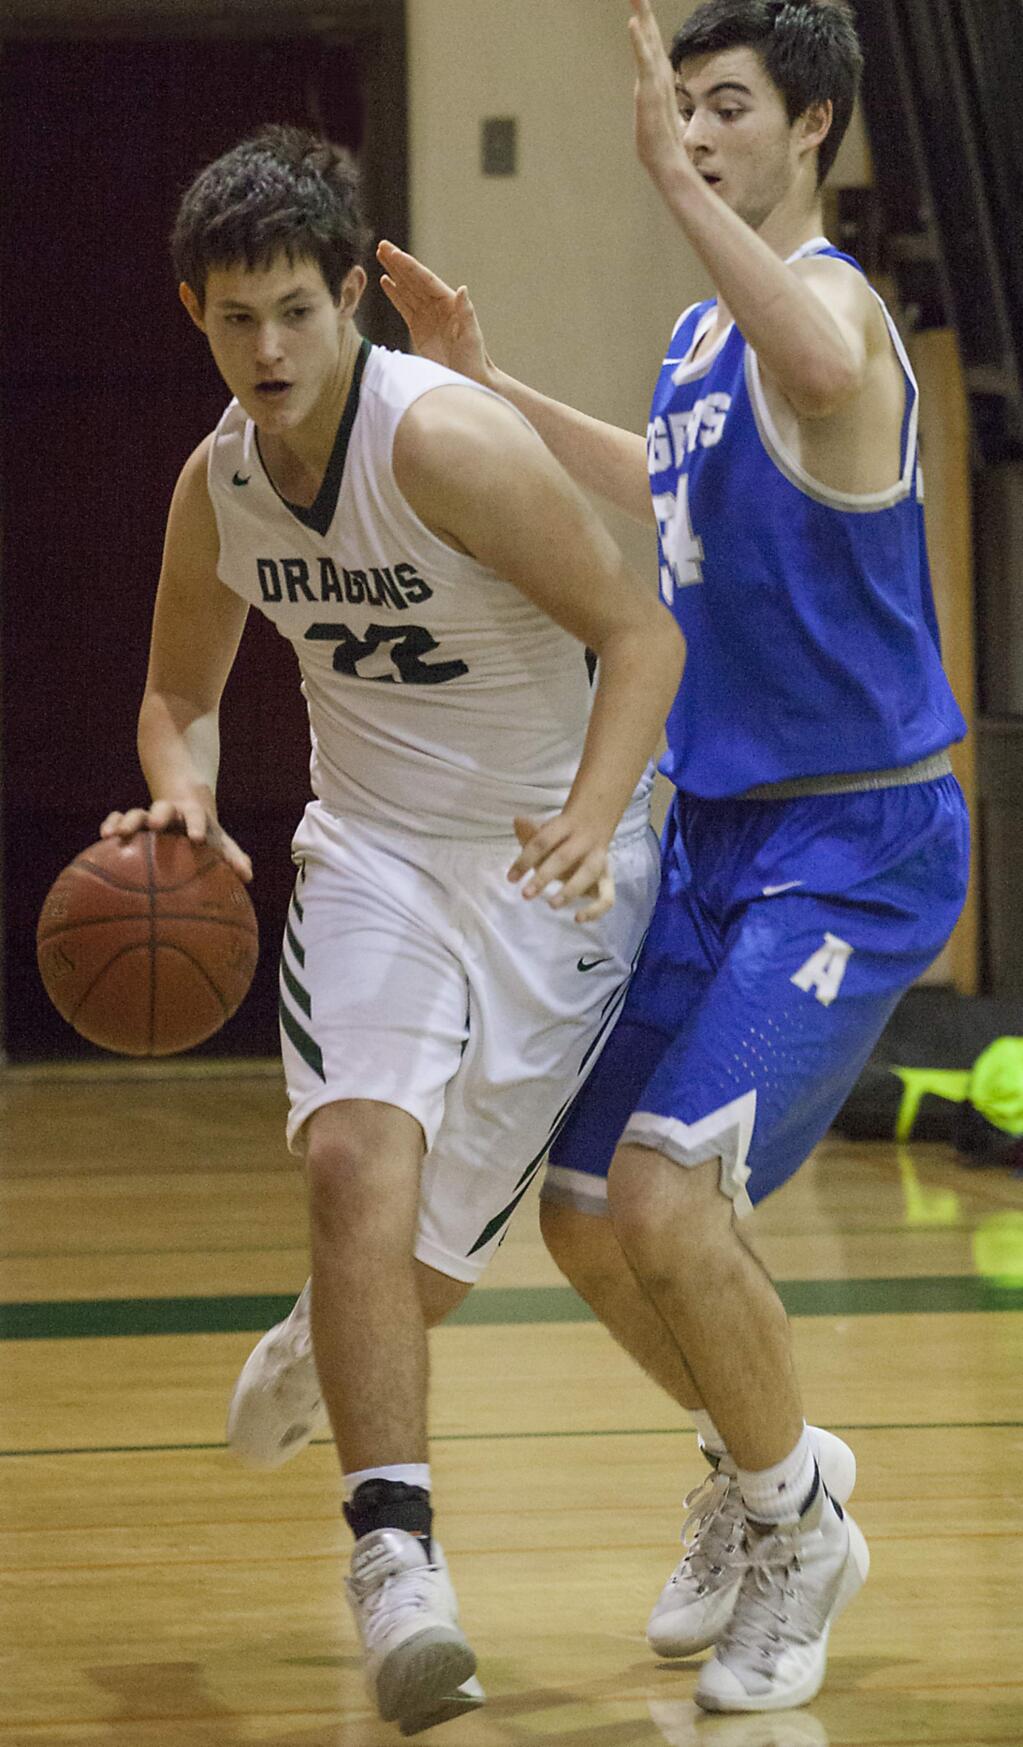 SOPHOMORE MAX GUSTAFSON scored 17 points but the Sonoma Dragons fell to Piner 59-55 in overtime last Thursday in Pfeiffer Gym. (Photo by Robbi Pengelly/Index-Tribune)